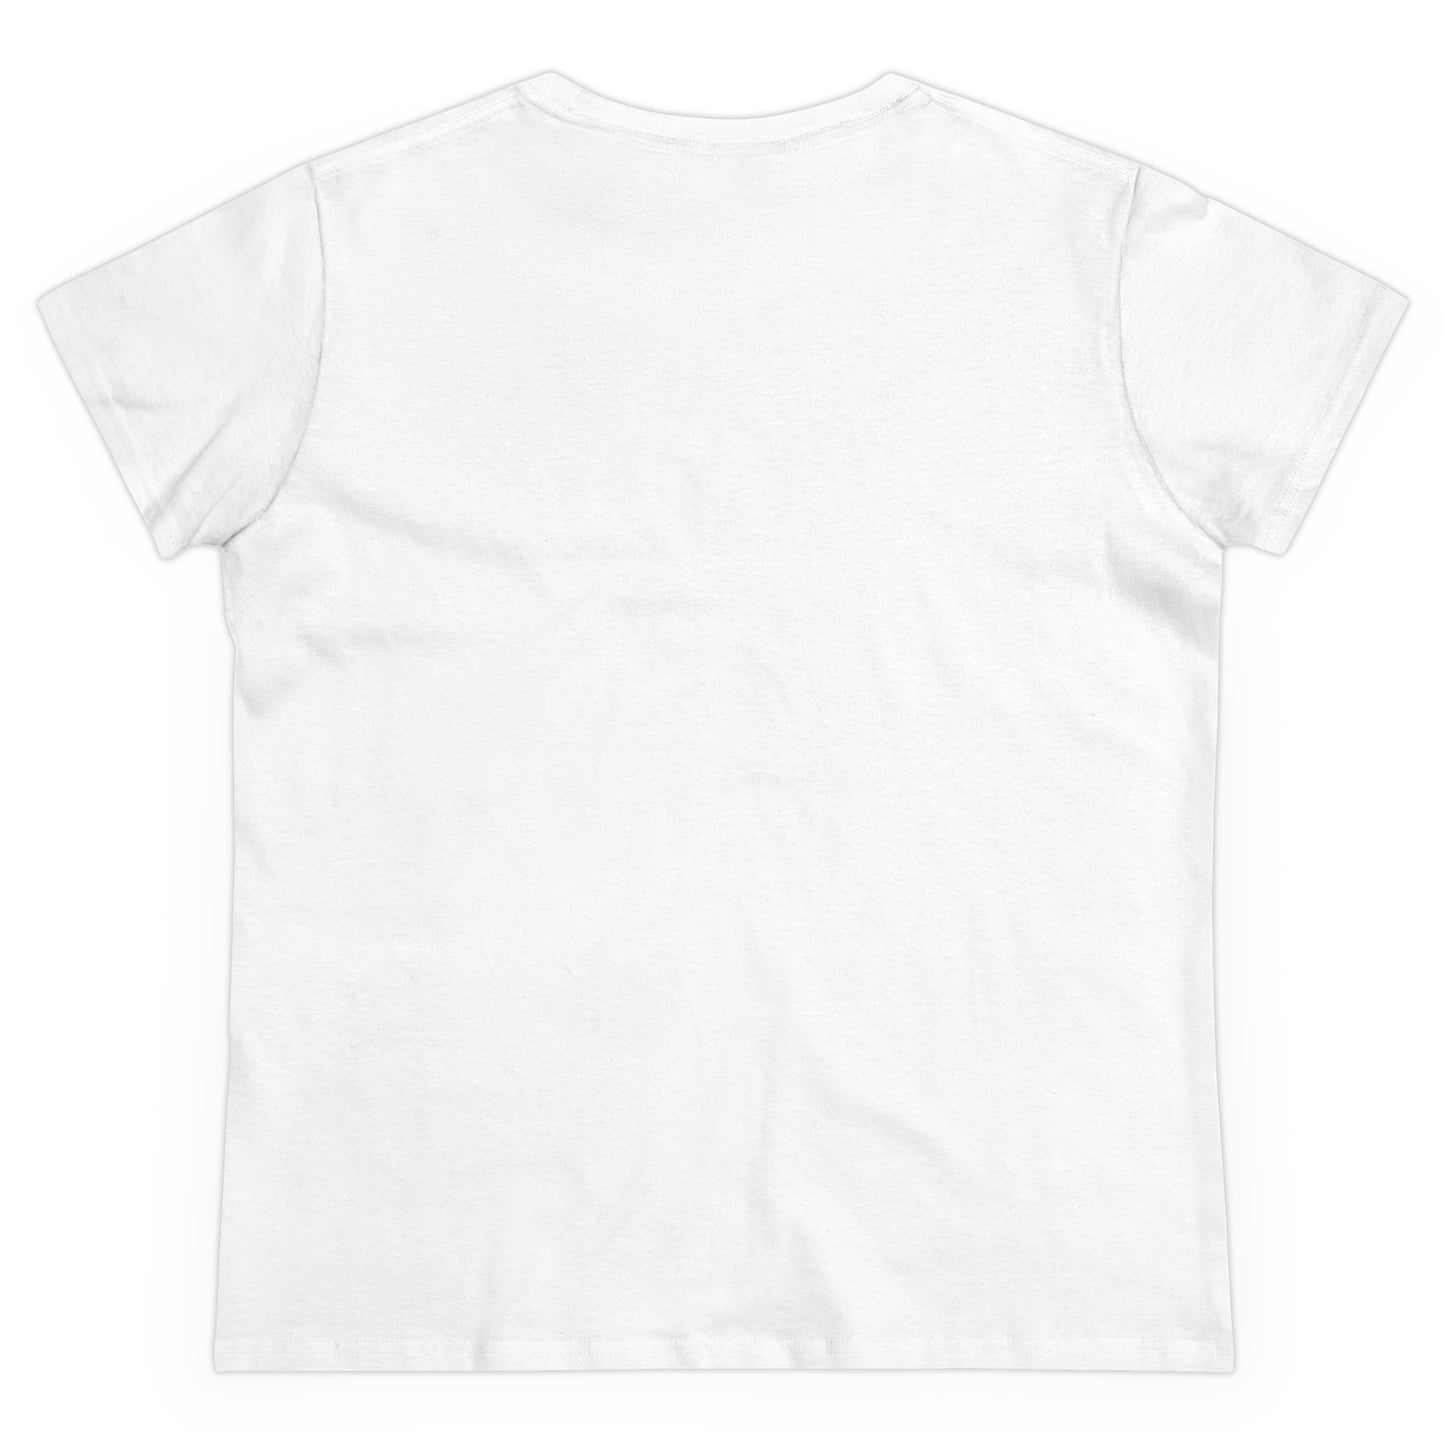 Celebrating Labor Day #2 - Women's Midweight Cotton Tee